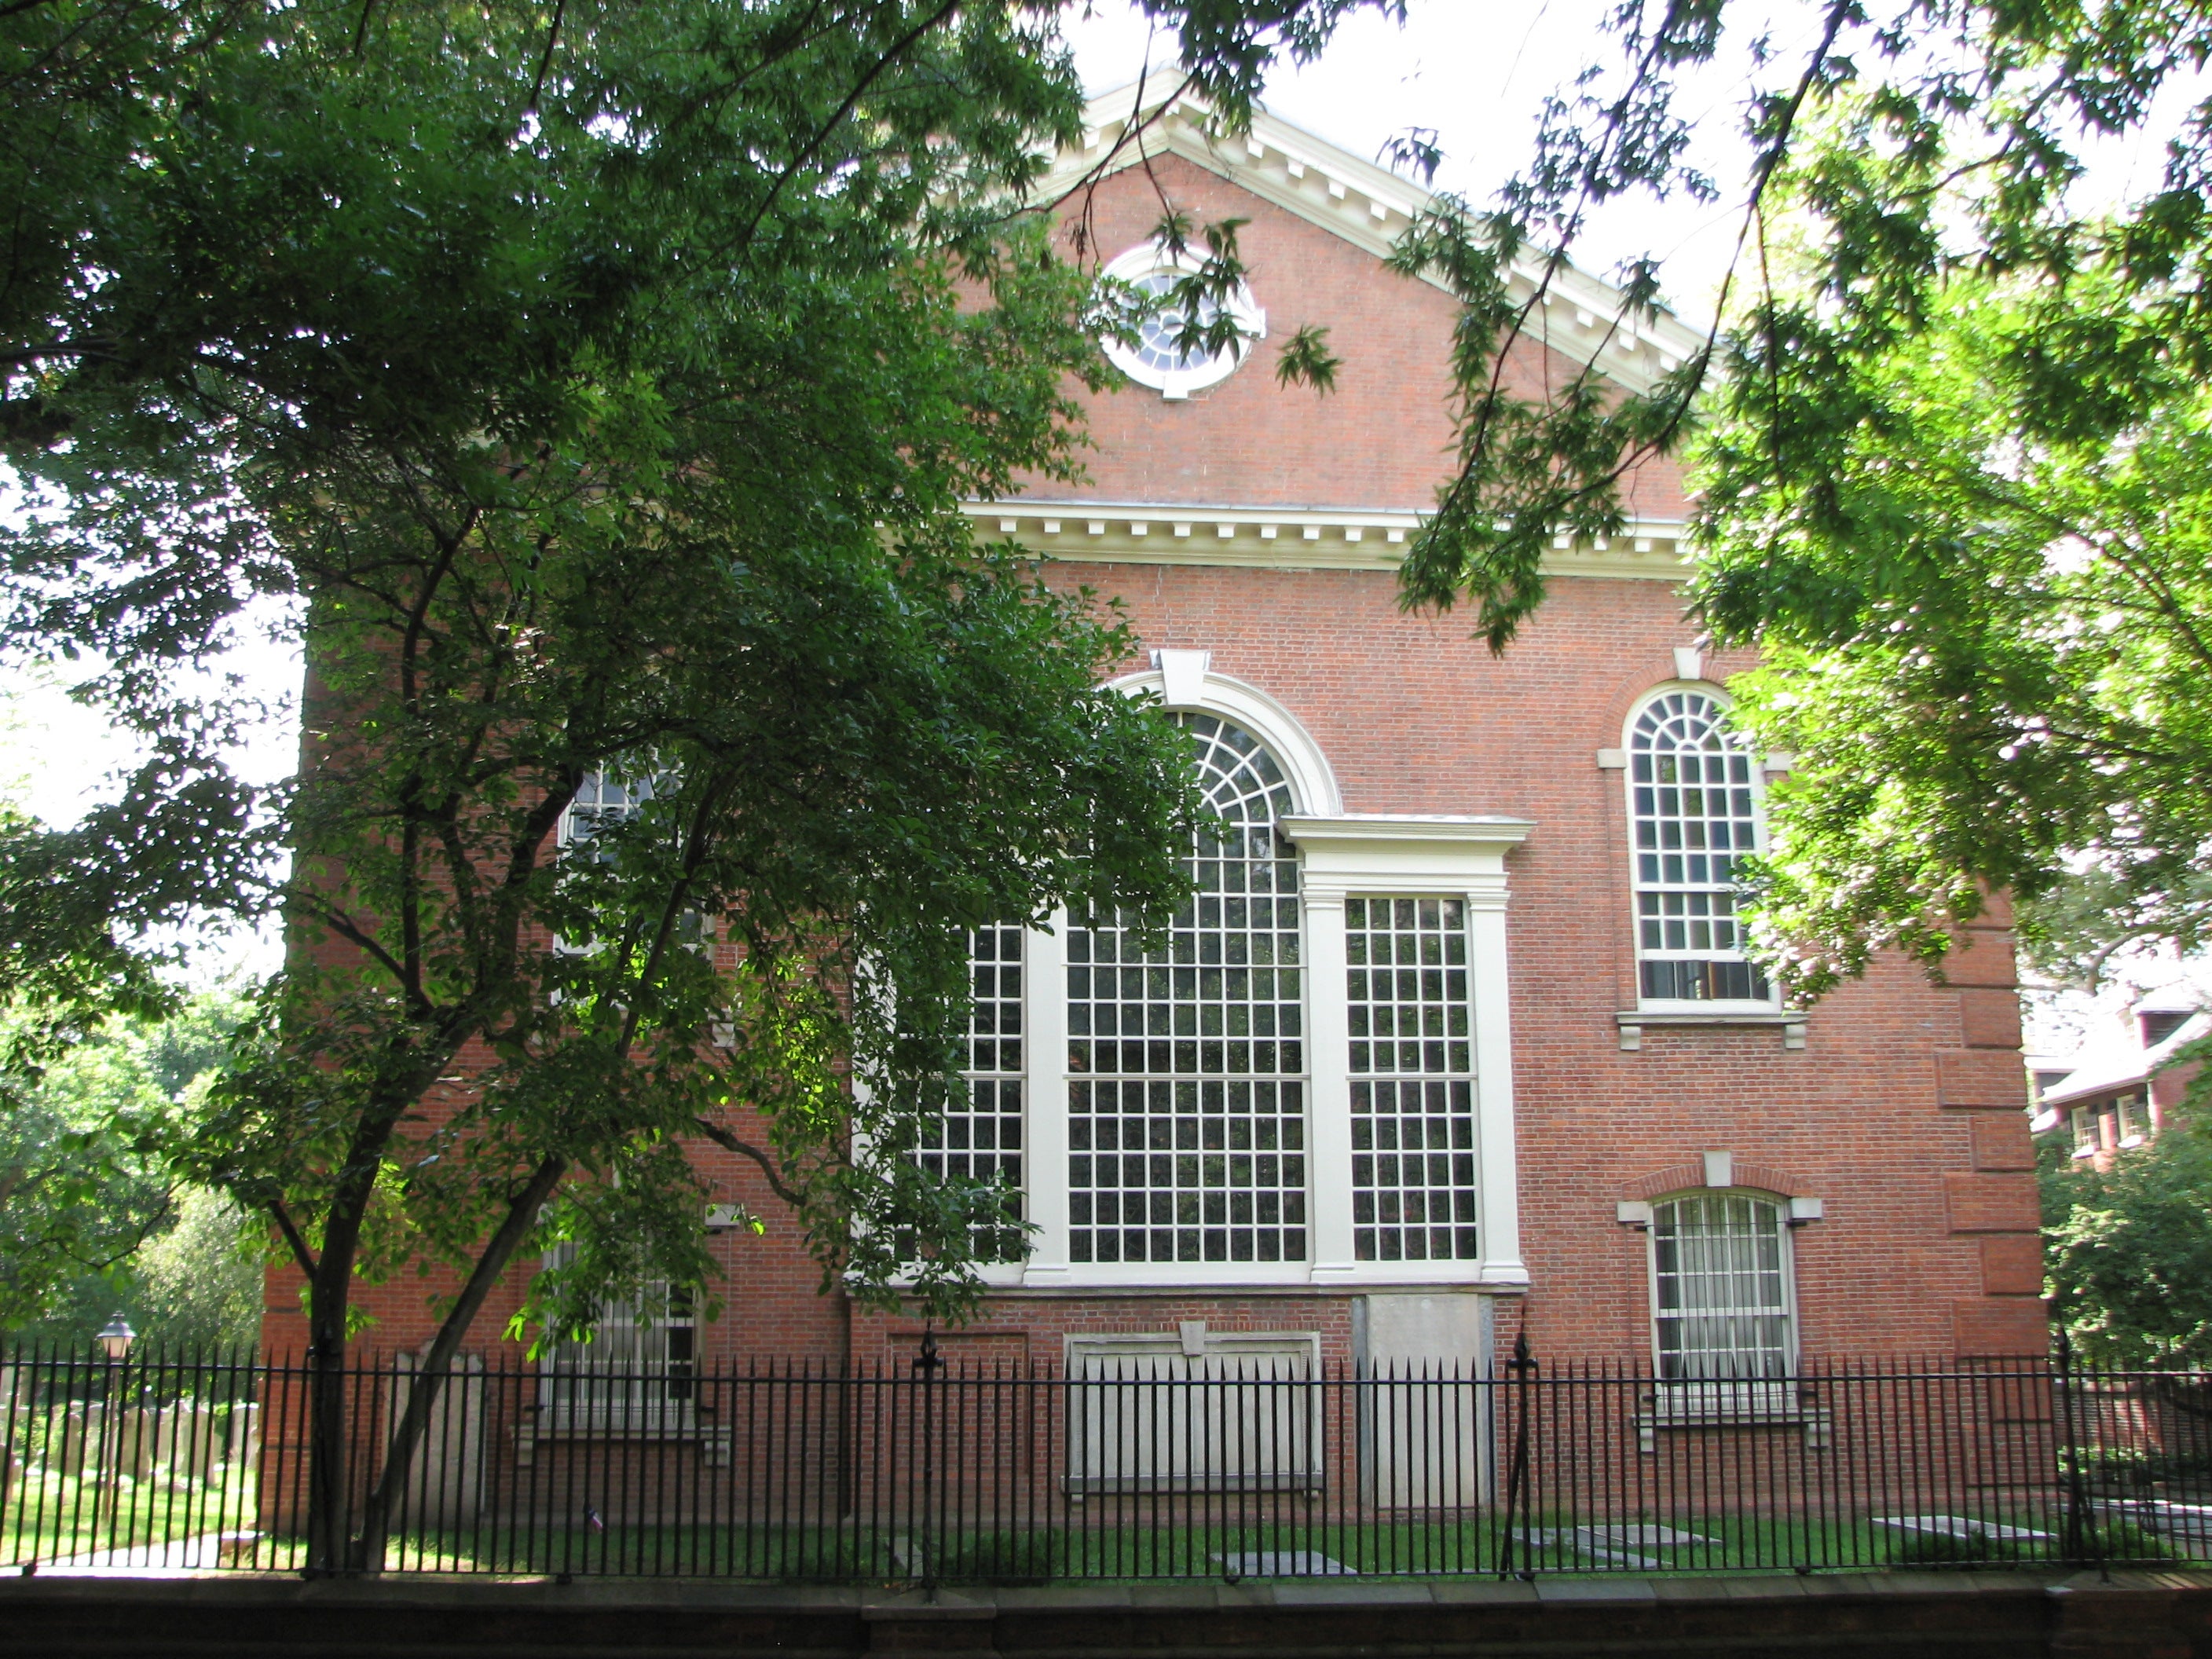 A large Palladian window is featured in Robert Smith’s design of St. Peter’s Church.